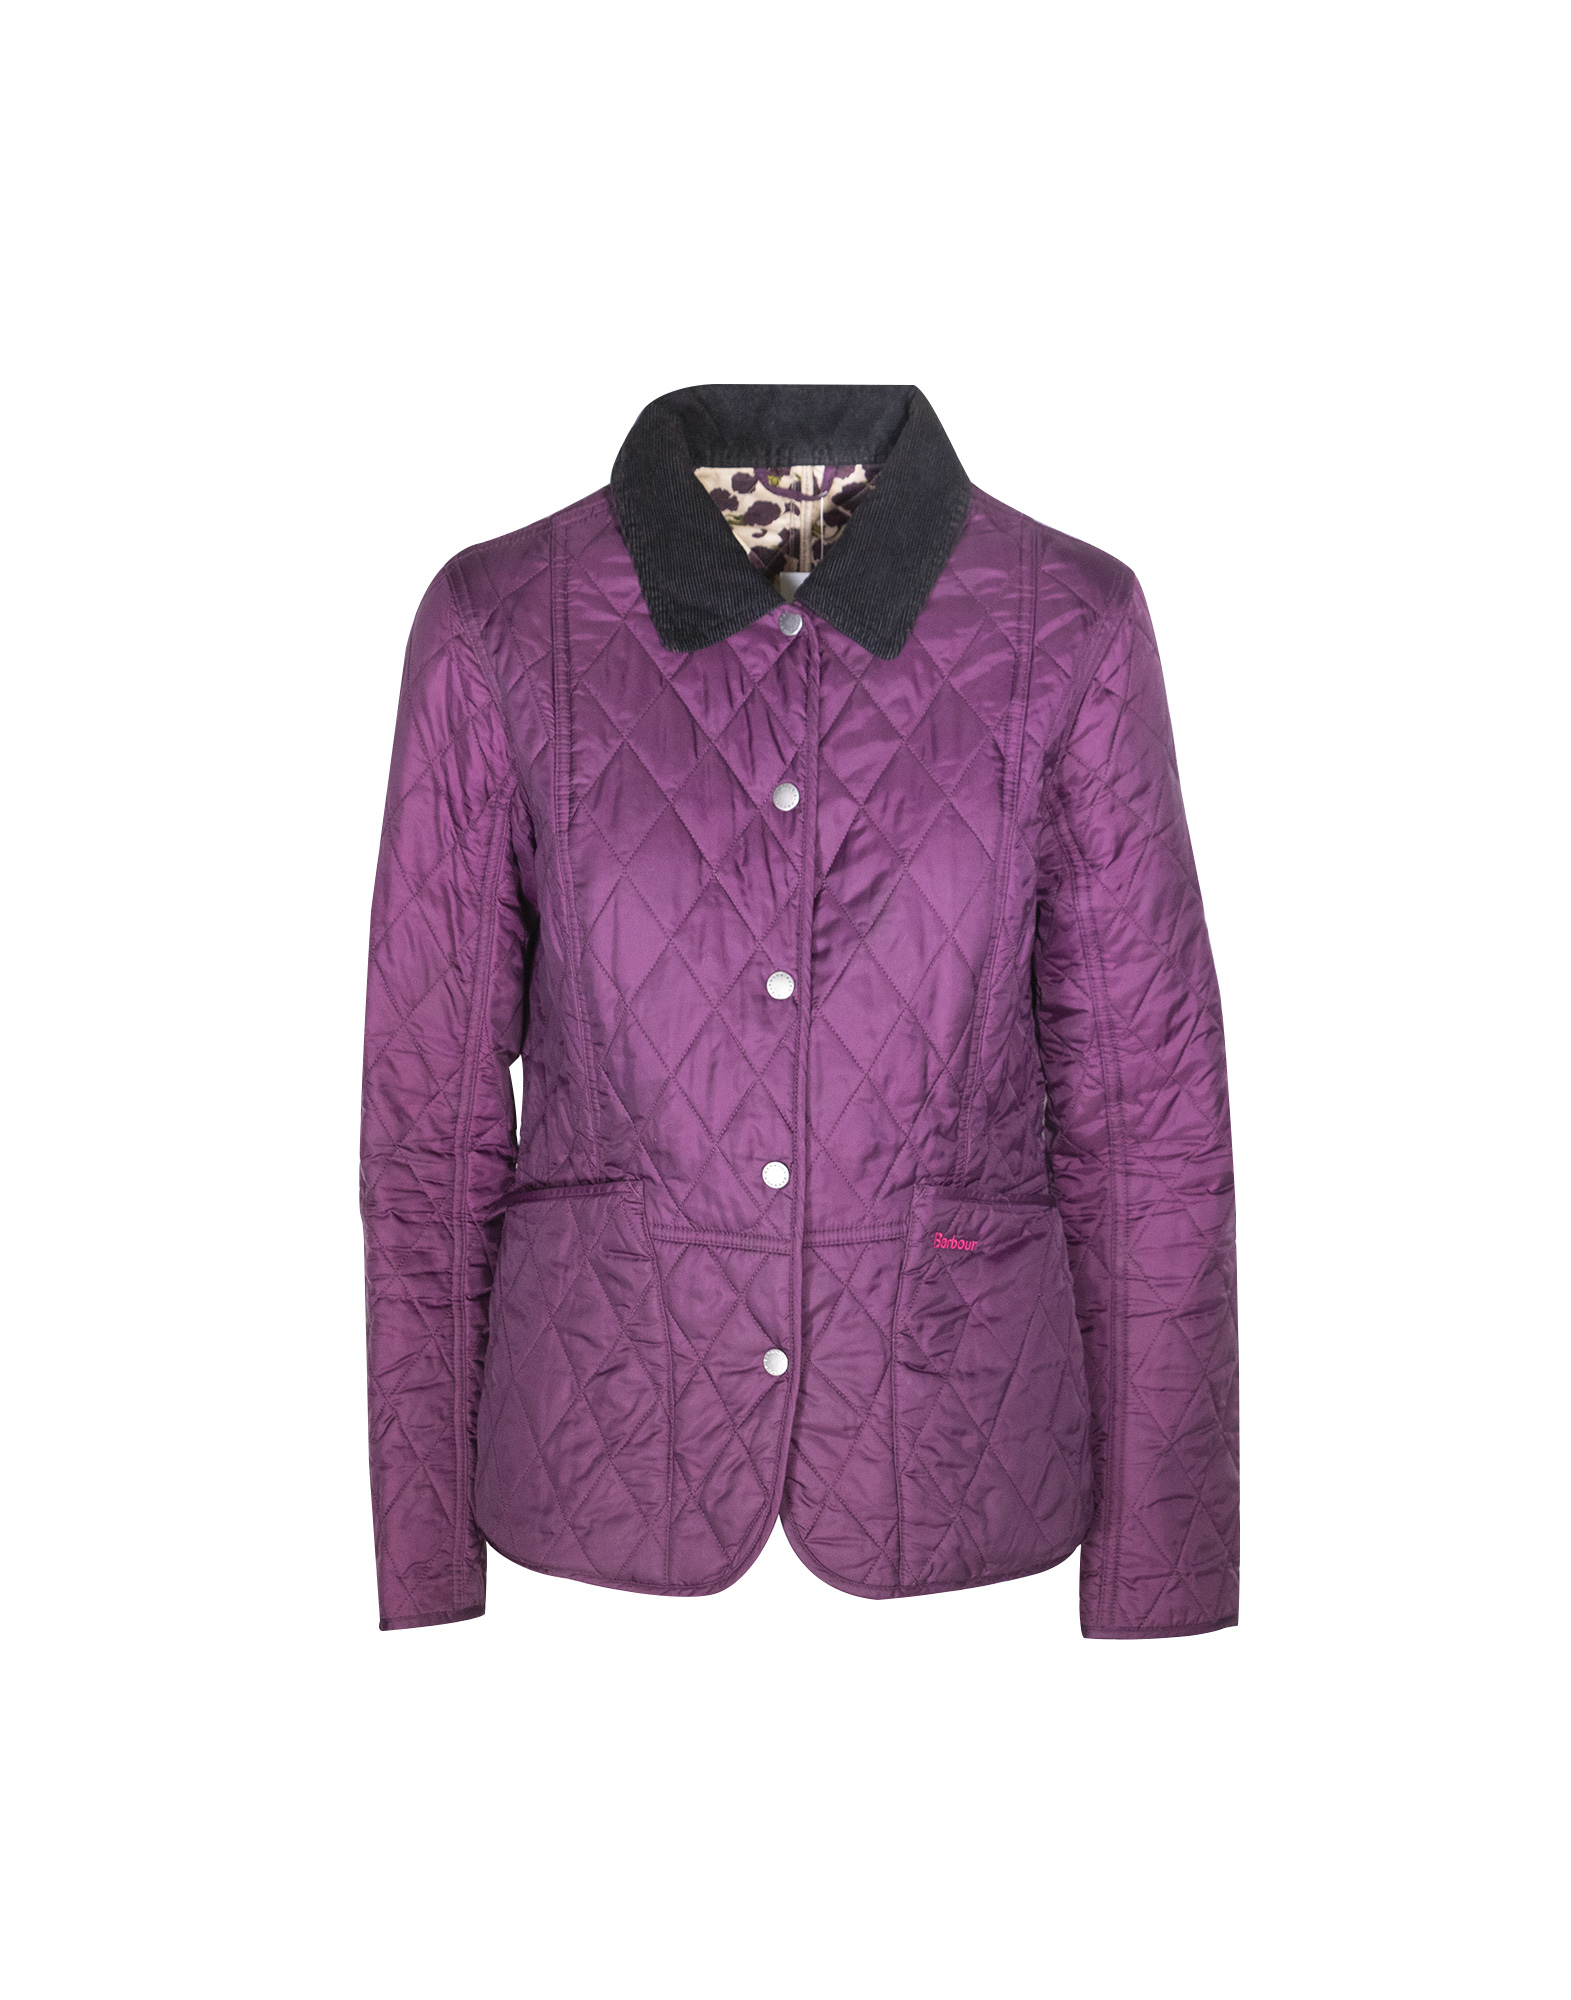 Barbour - Purple quilted jacket